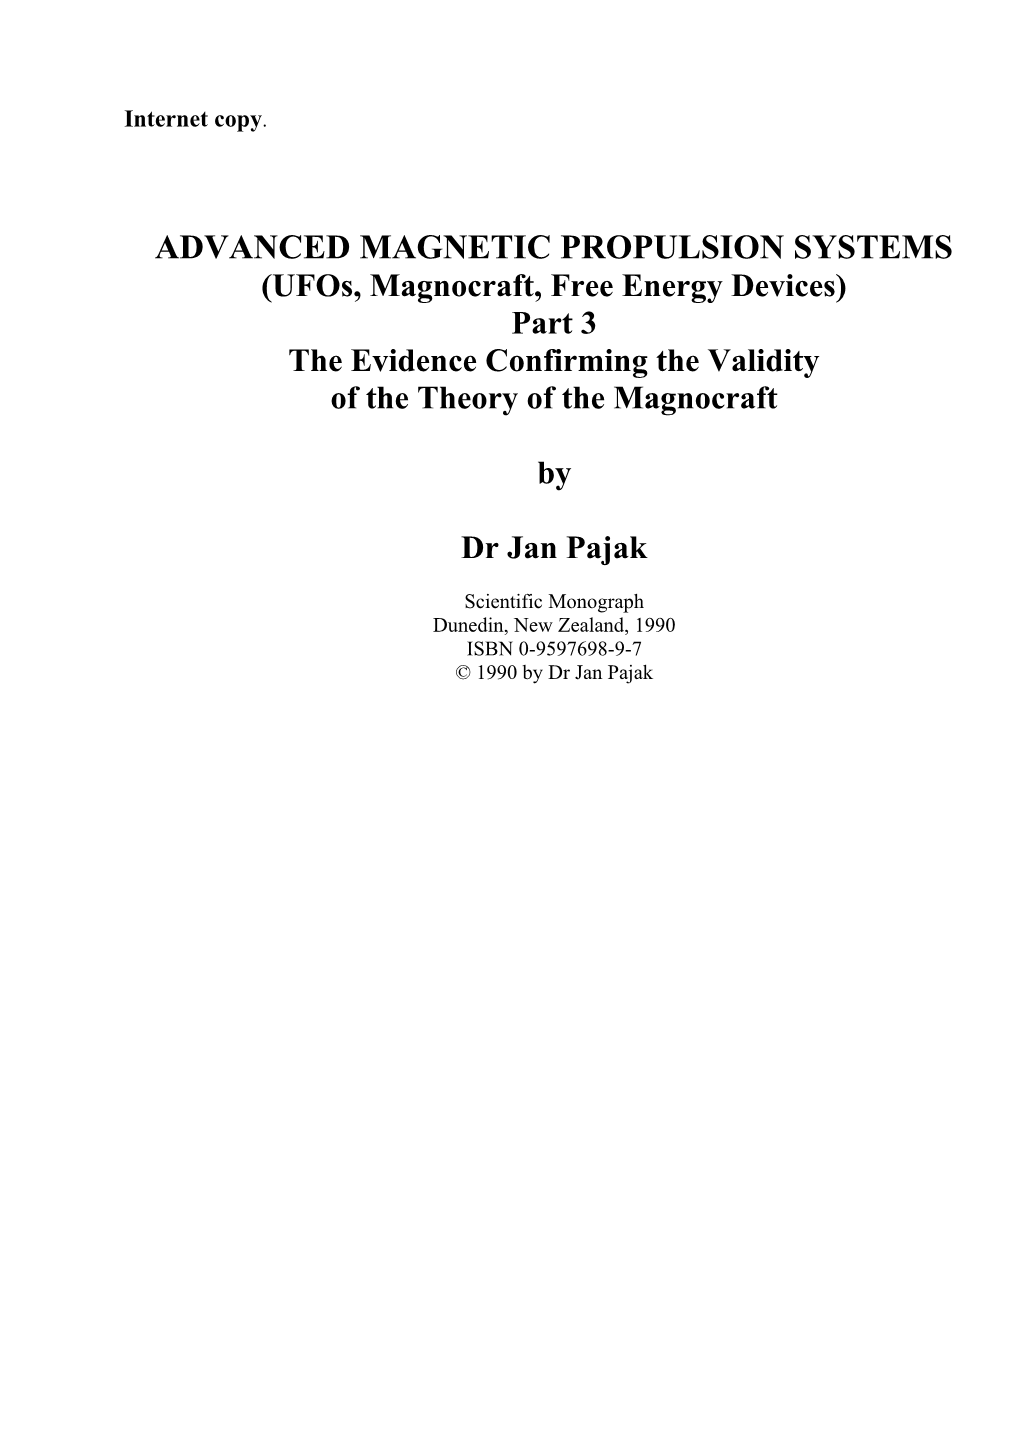 Advanced Magnetic Propulsion Systems